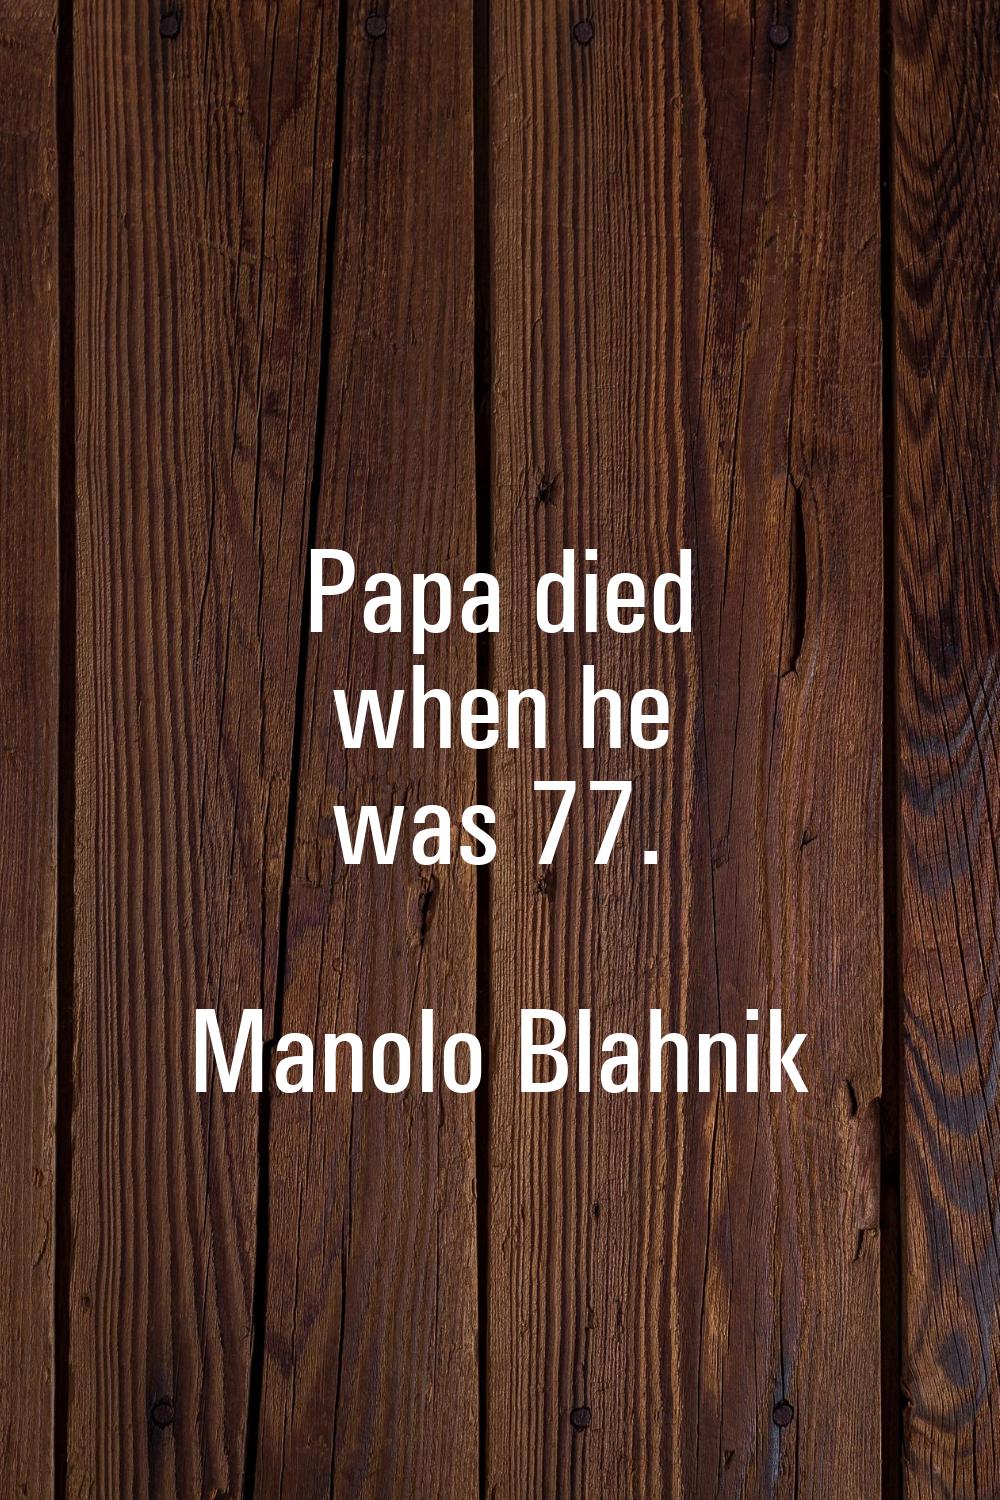 Papa died when he was 77.